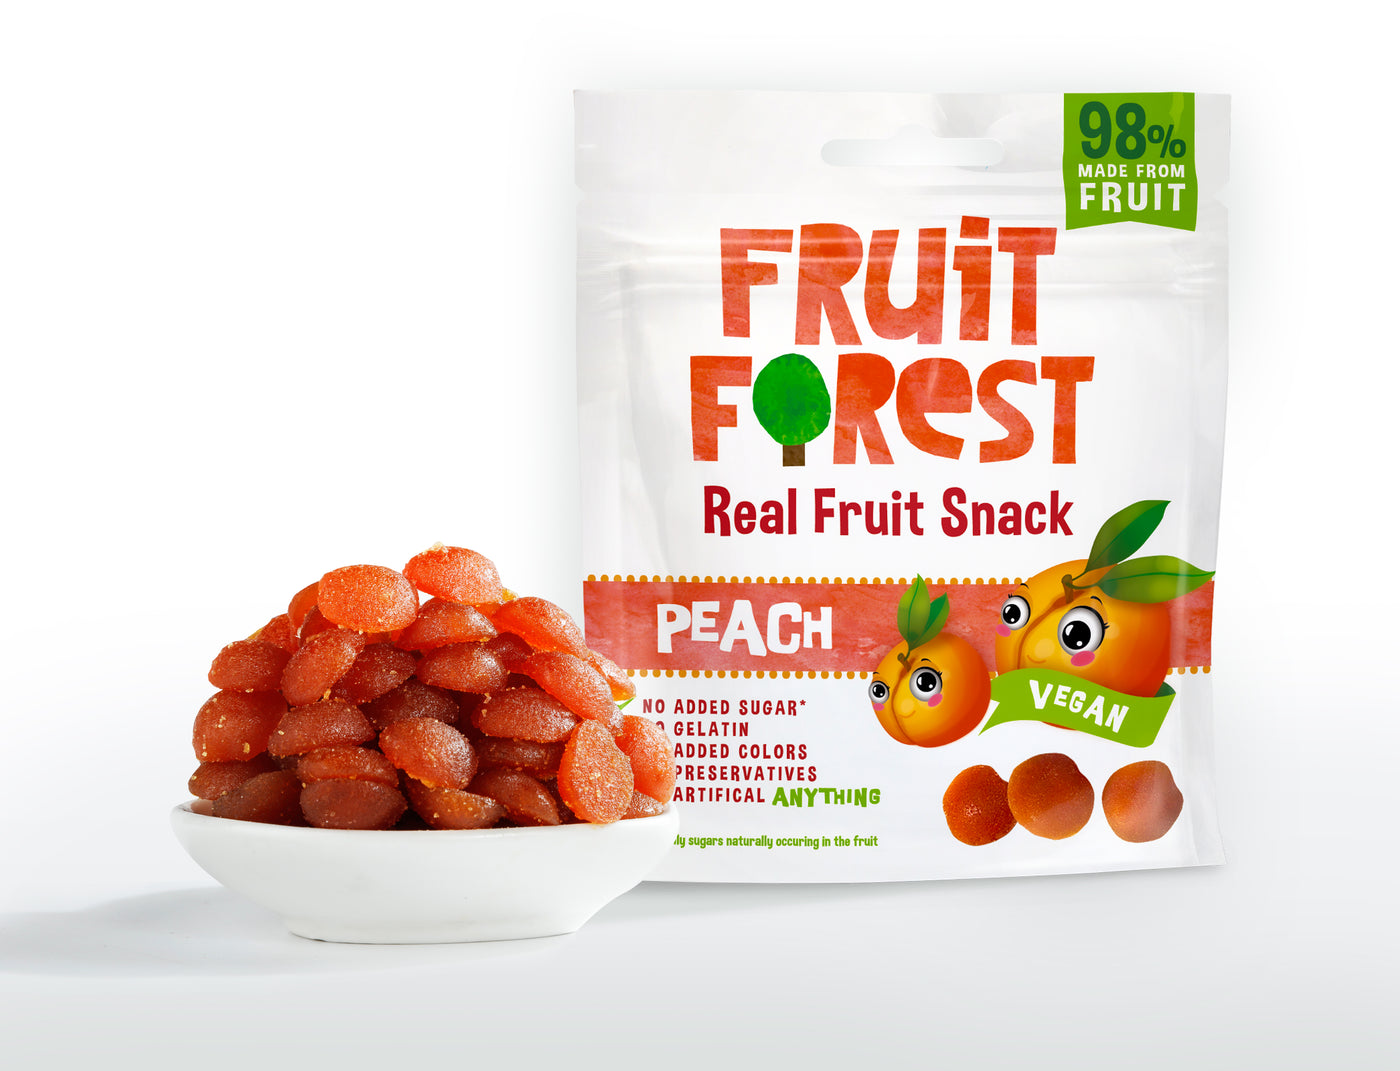 Fruit Forest Real Fruit Snack - Assorted Pack of 3